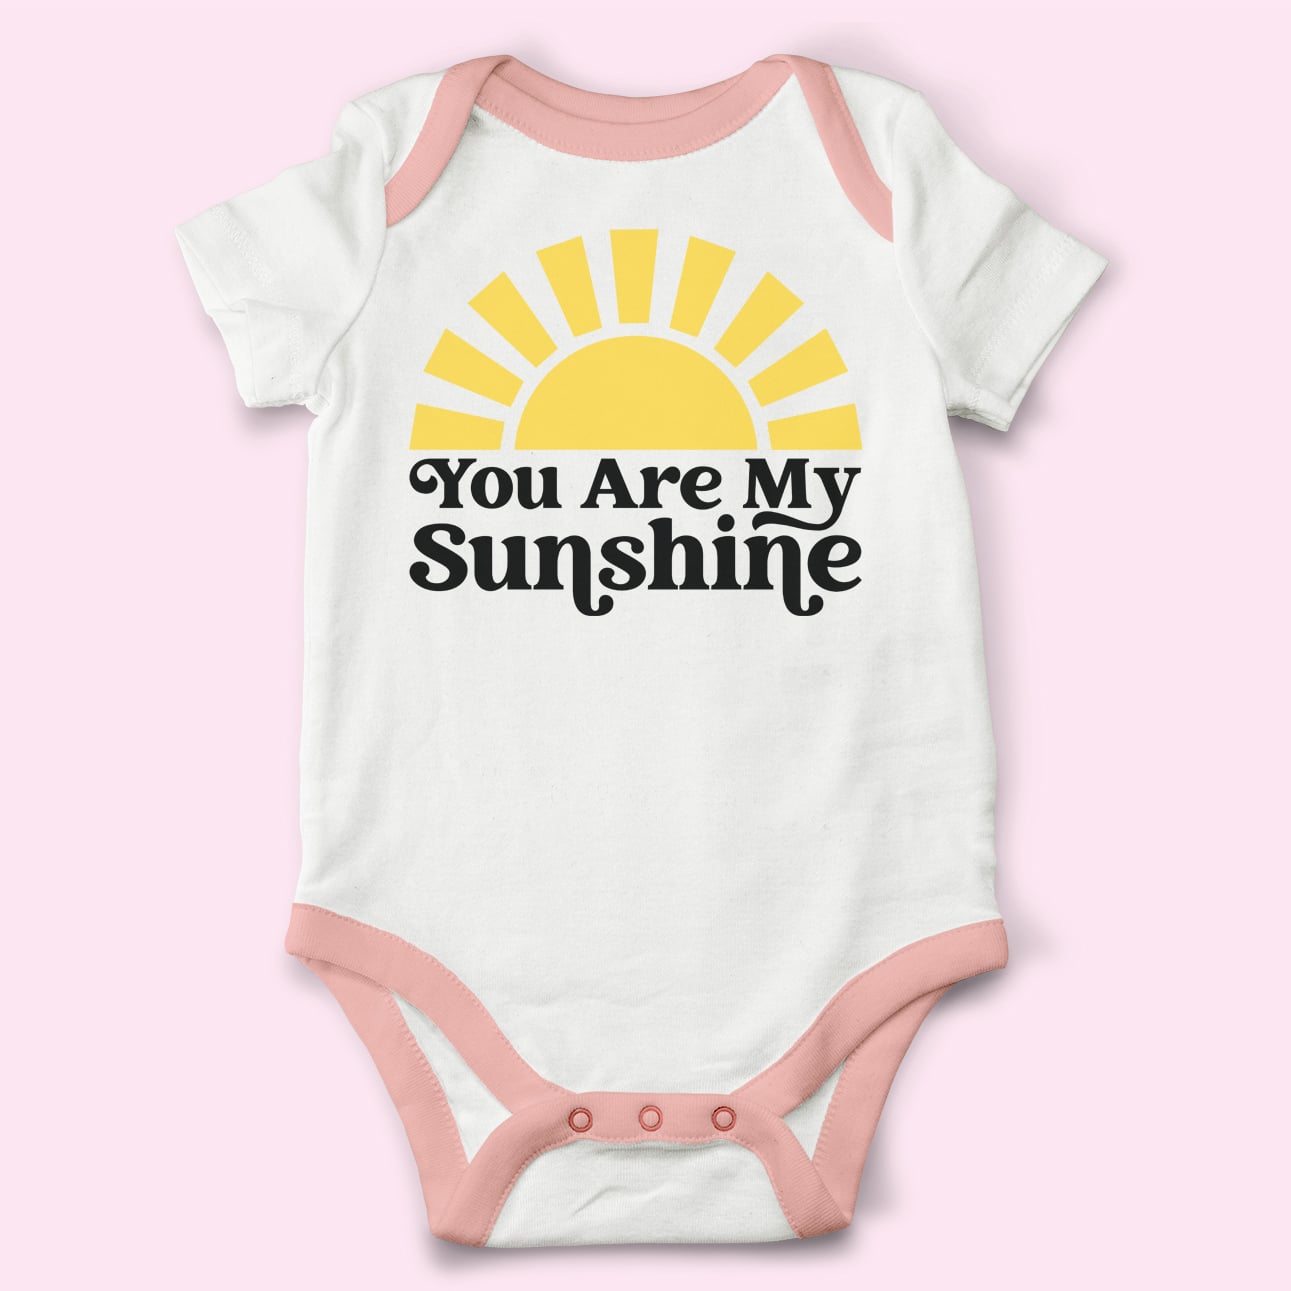 you are my sunshine svg file on baby onesie with pink background